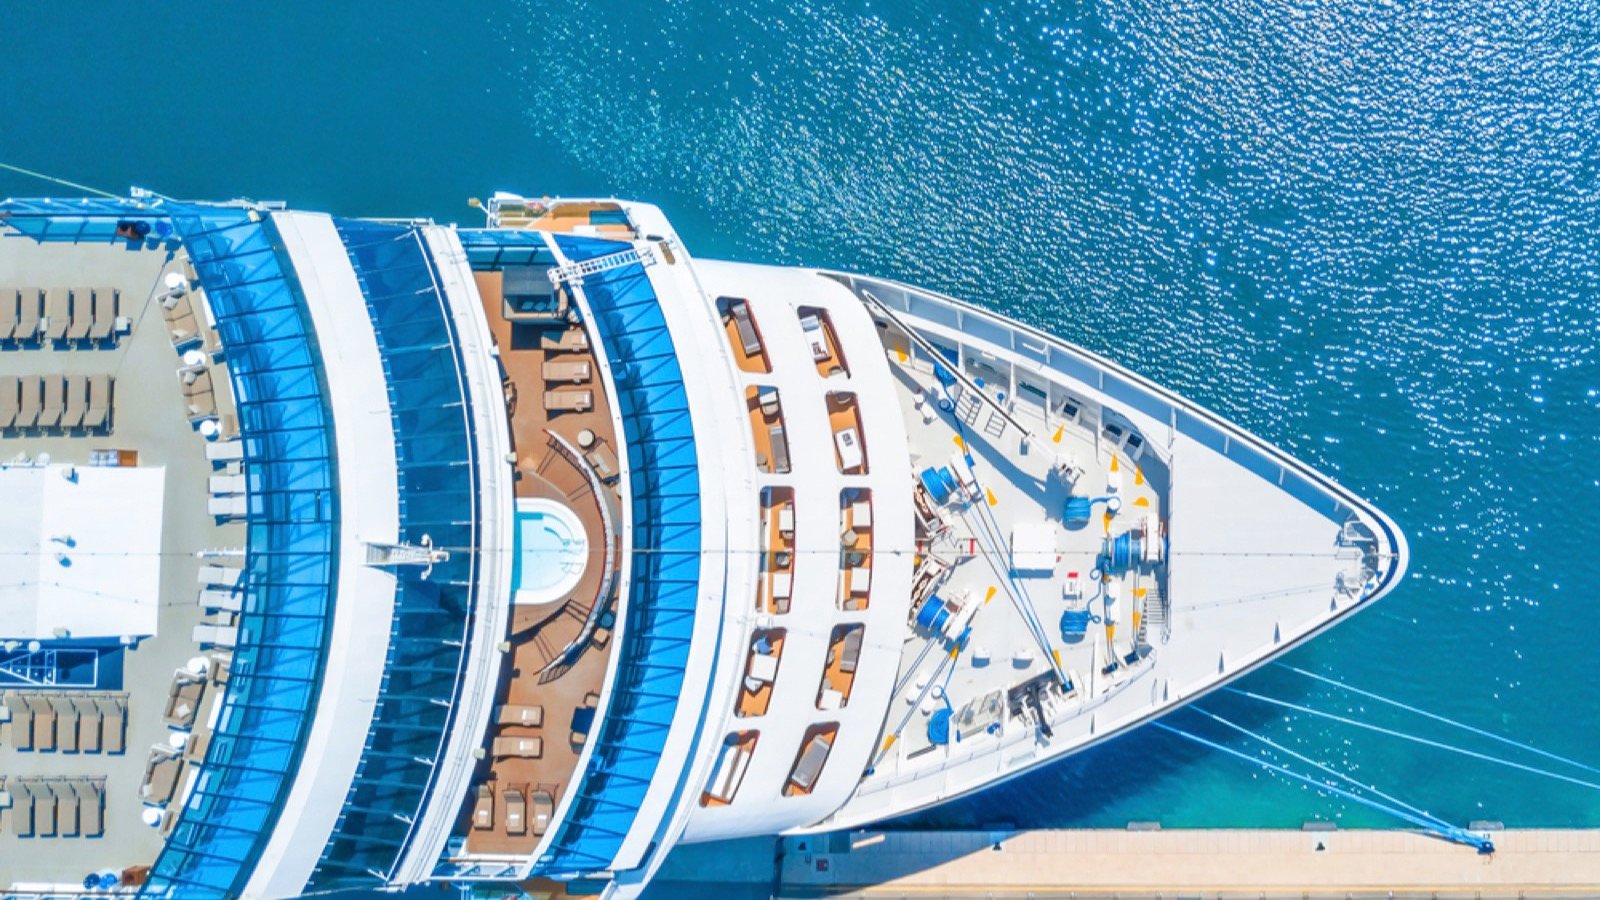 <p>Set sail on a grand 168-night adventure around the world with the Seven Seas Mariner, where the Master Suite starts at $99,949 per person. This suite, spanning 1,204 square feet, accommodates up to five guests and includes luxury amenities such as Hermes and L’Occitane products. Enjoy $1,000 onboard credit for early bookings and the comfort of a king-size suite slumber bed as you visit dozens of ports and embrace the high seas.</p>